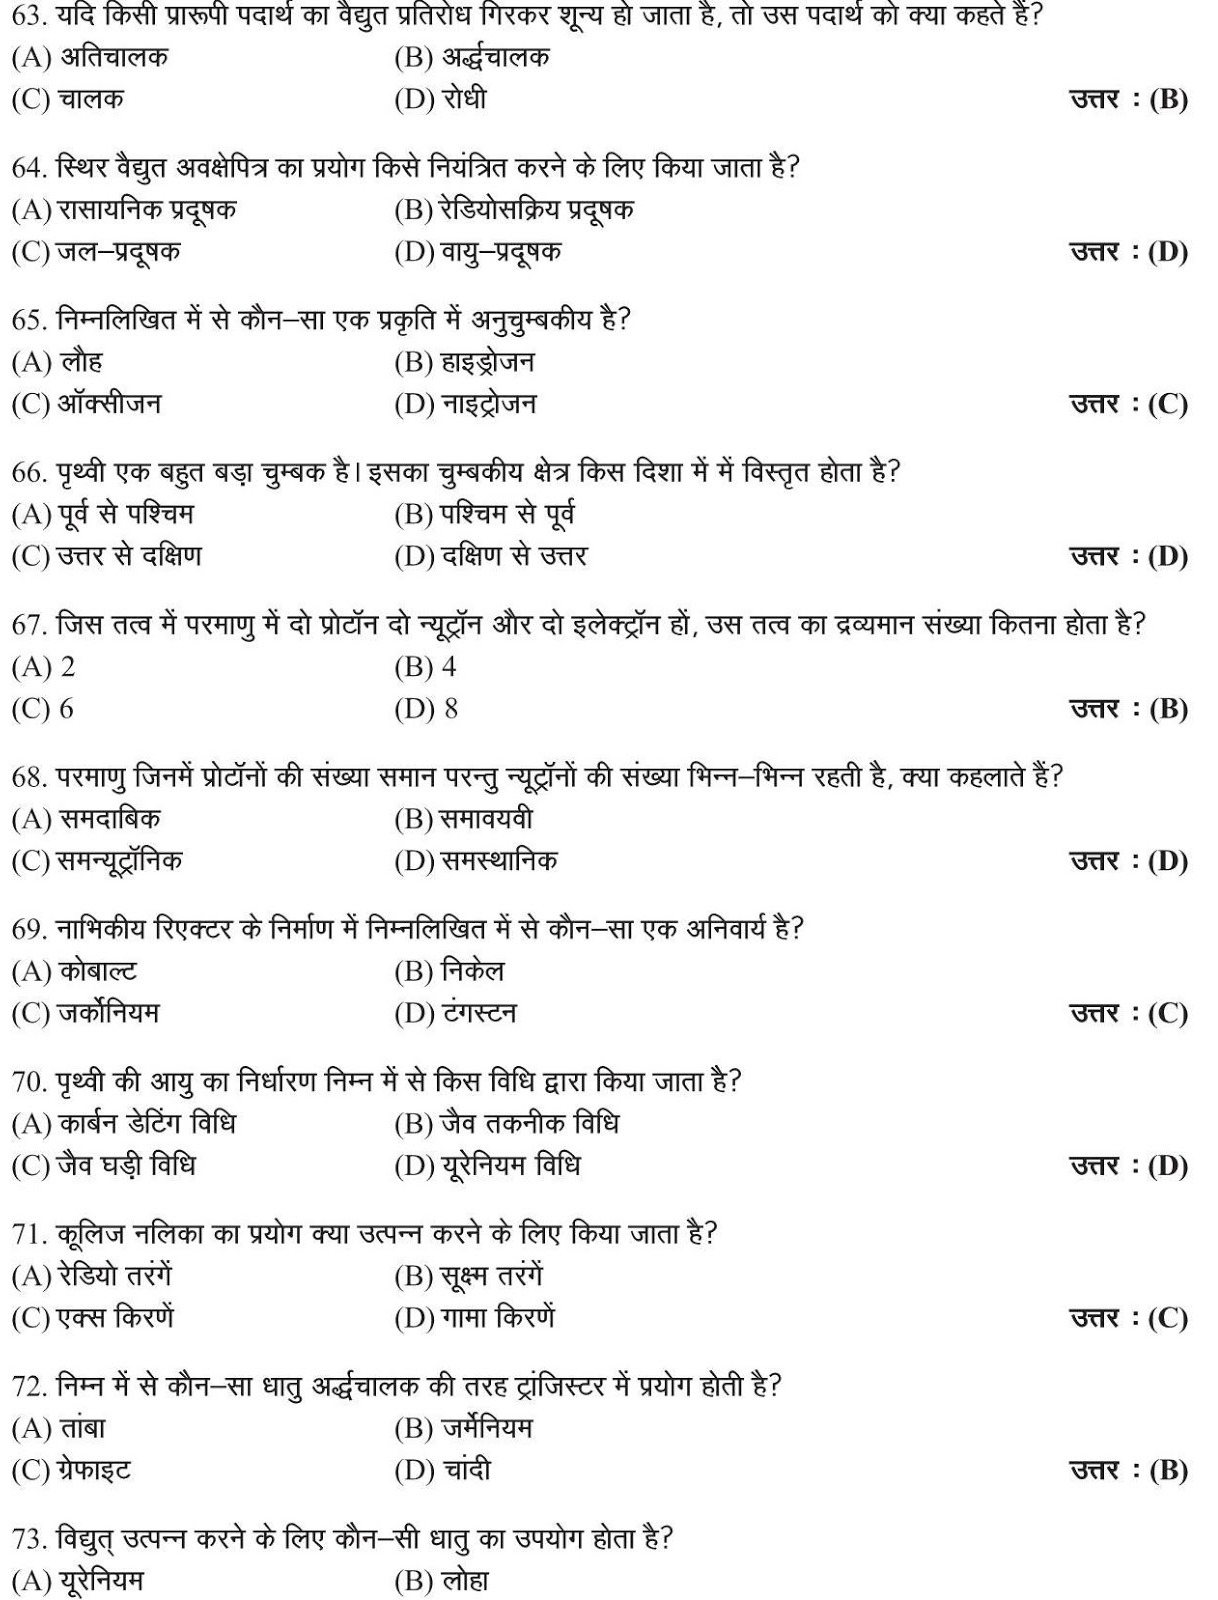 PHYSICS GENERAL KNOWLEDGE QUESTIONS PHYSICS GK ANSWERS